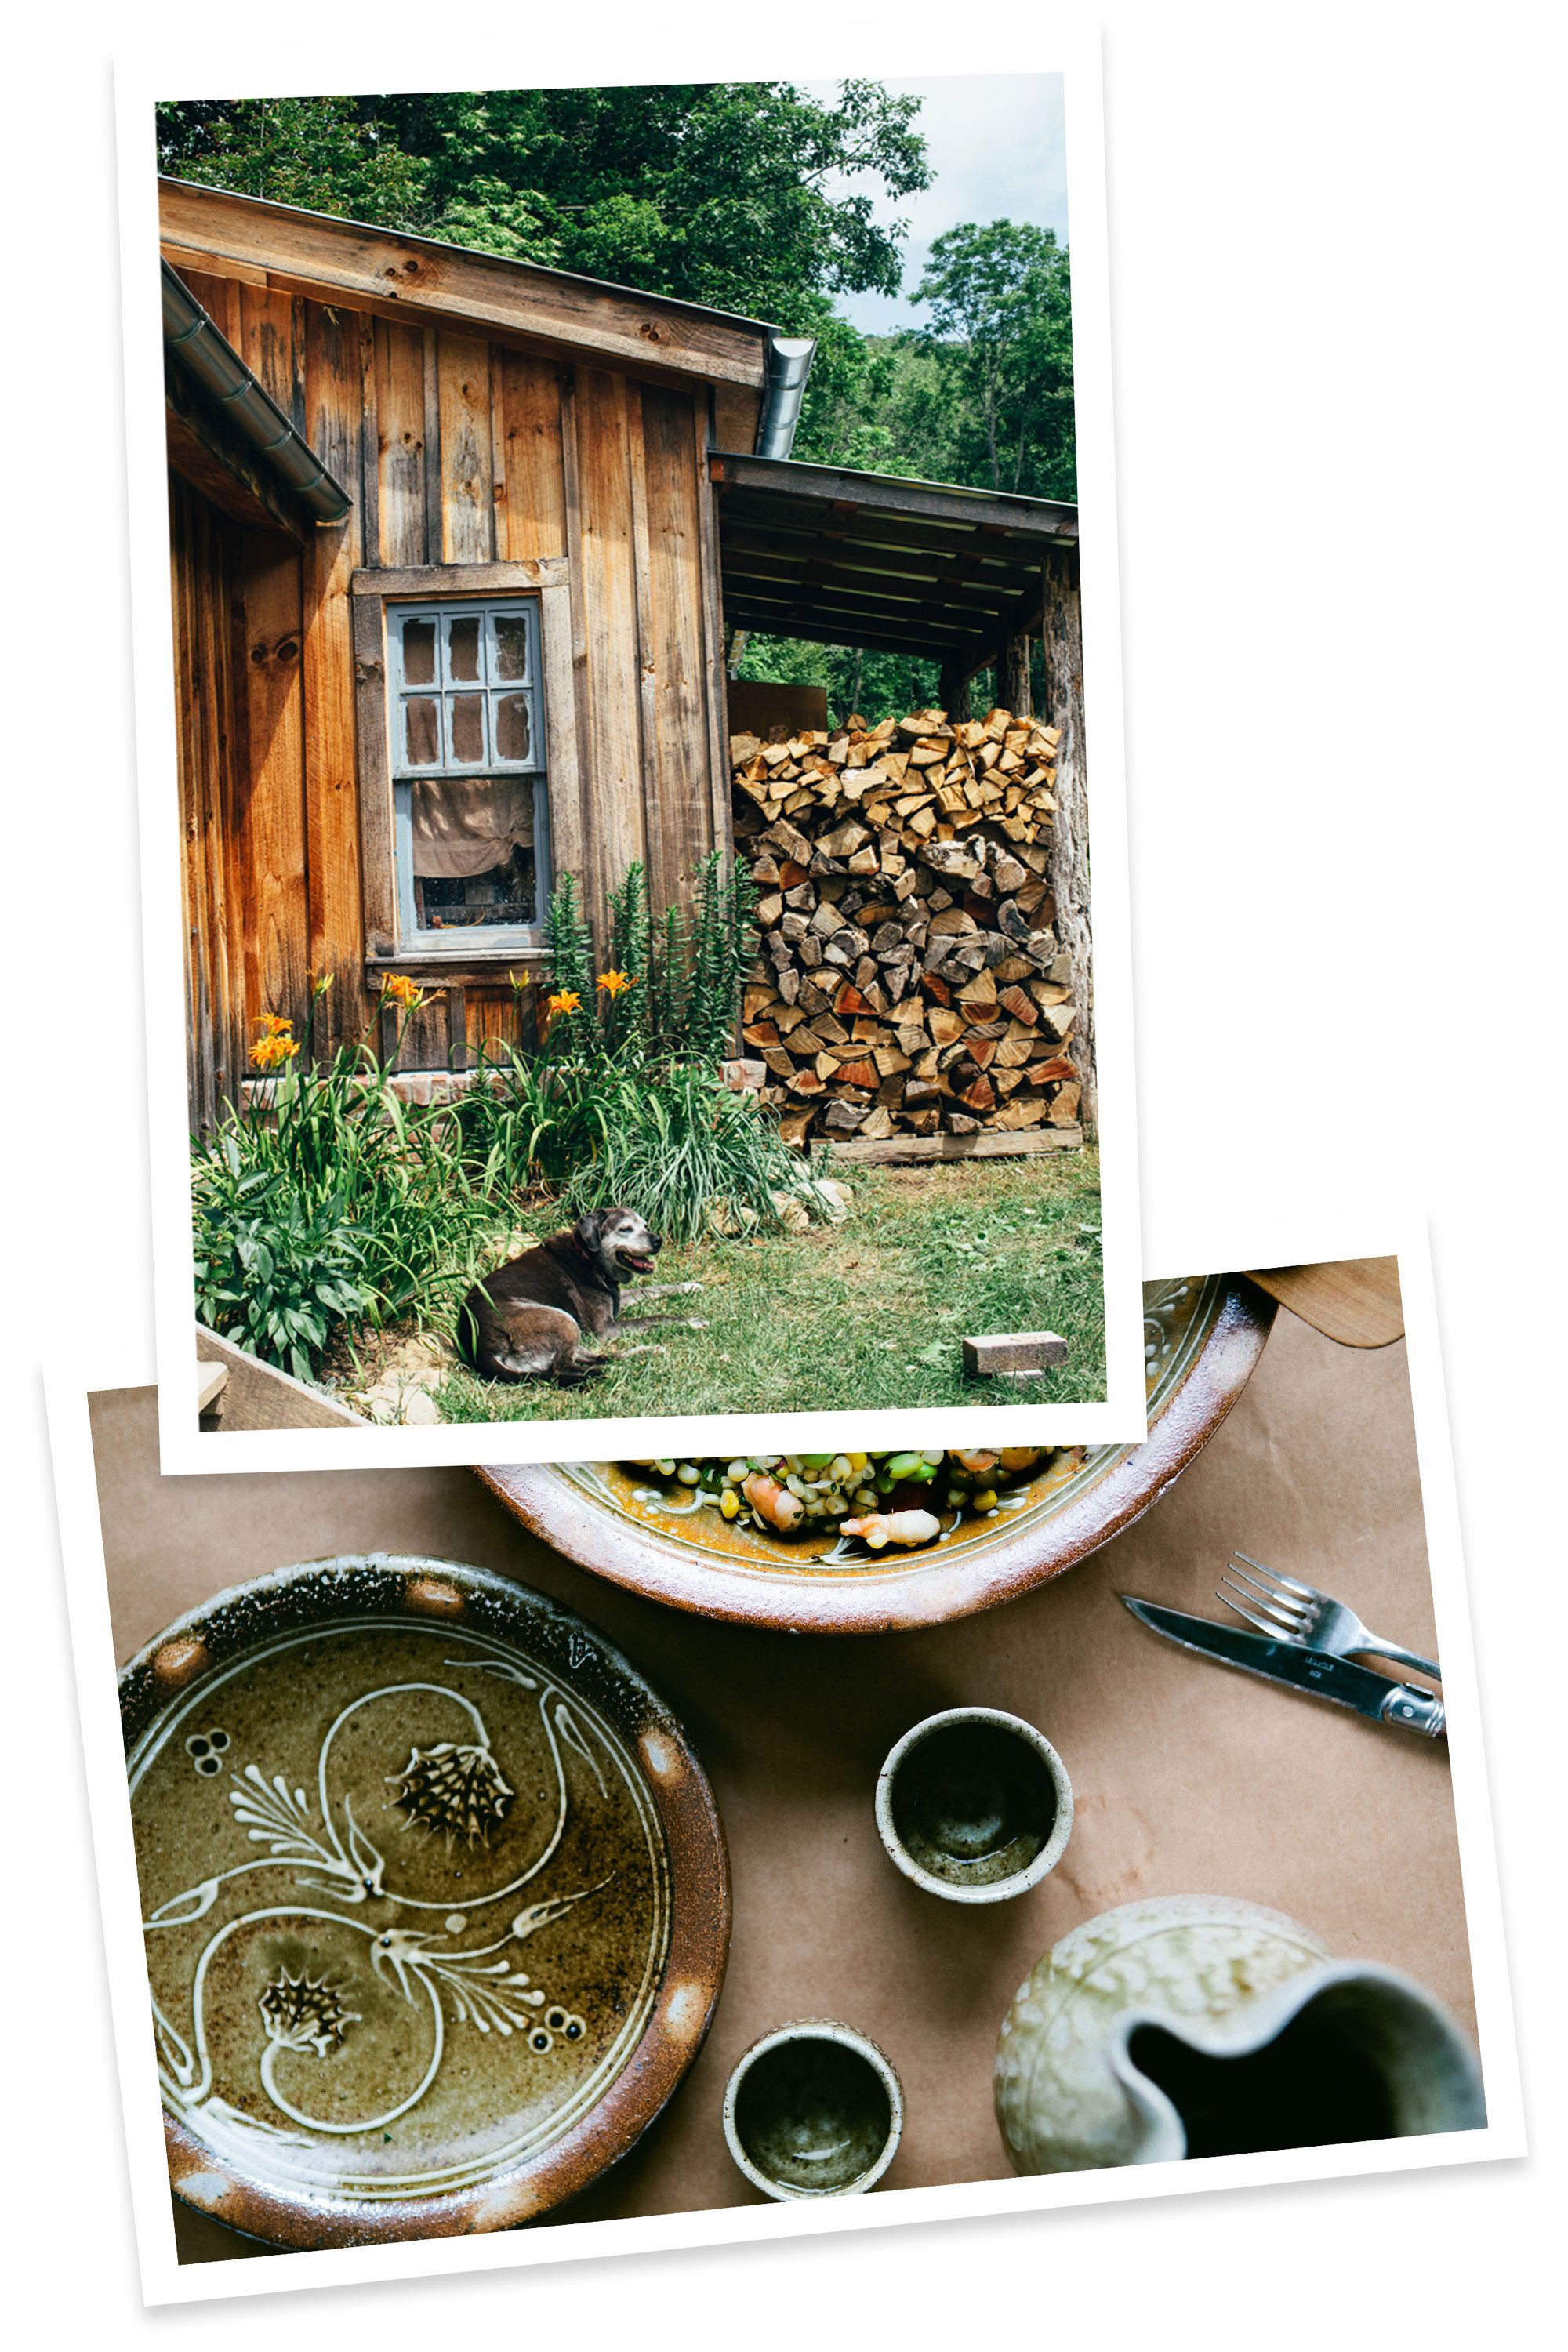 Workshop and wood-fired pots from the early East Fork days